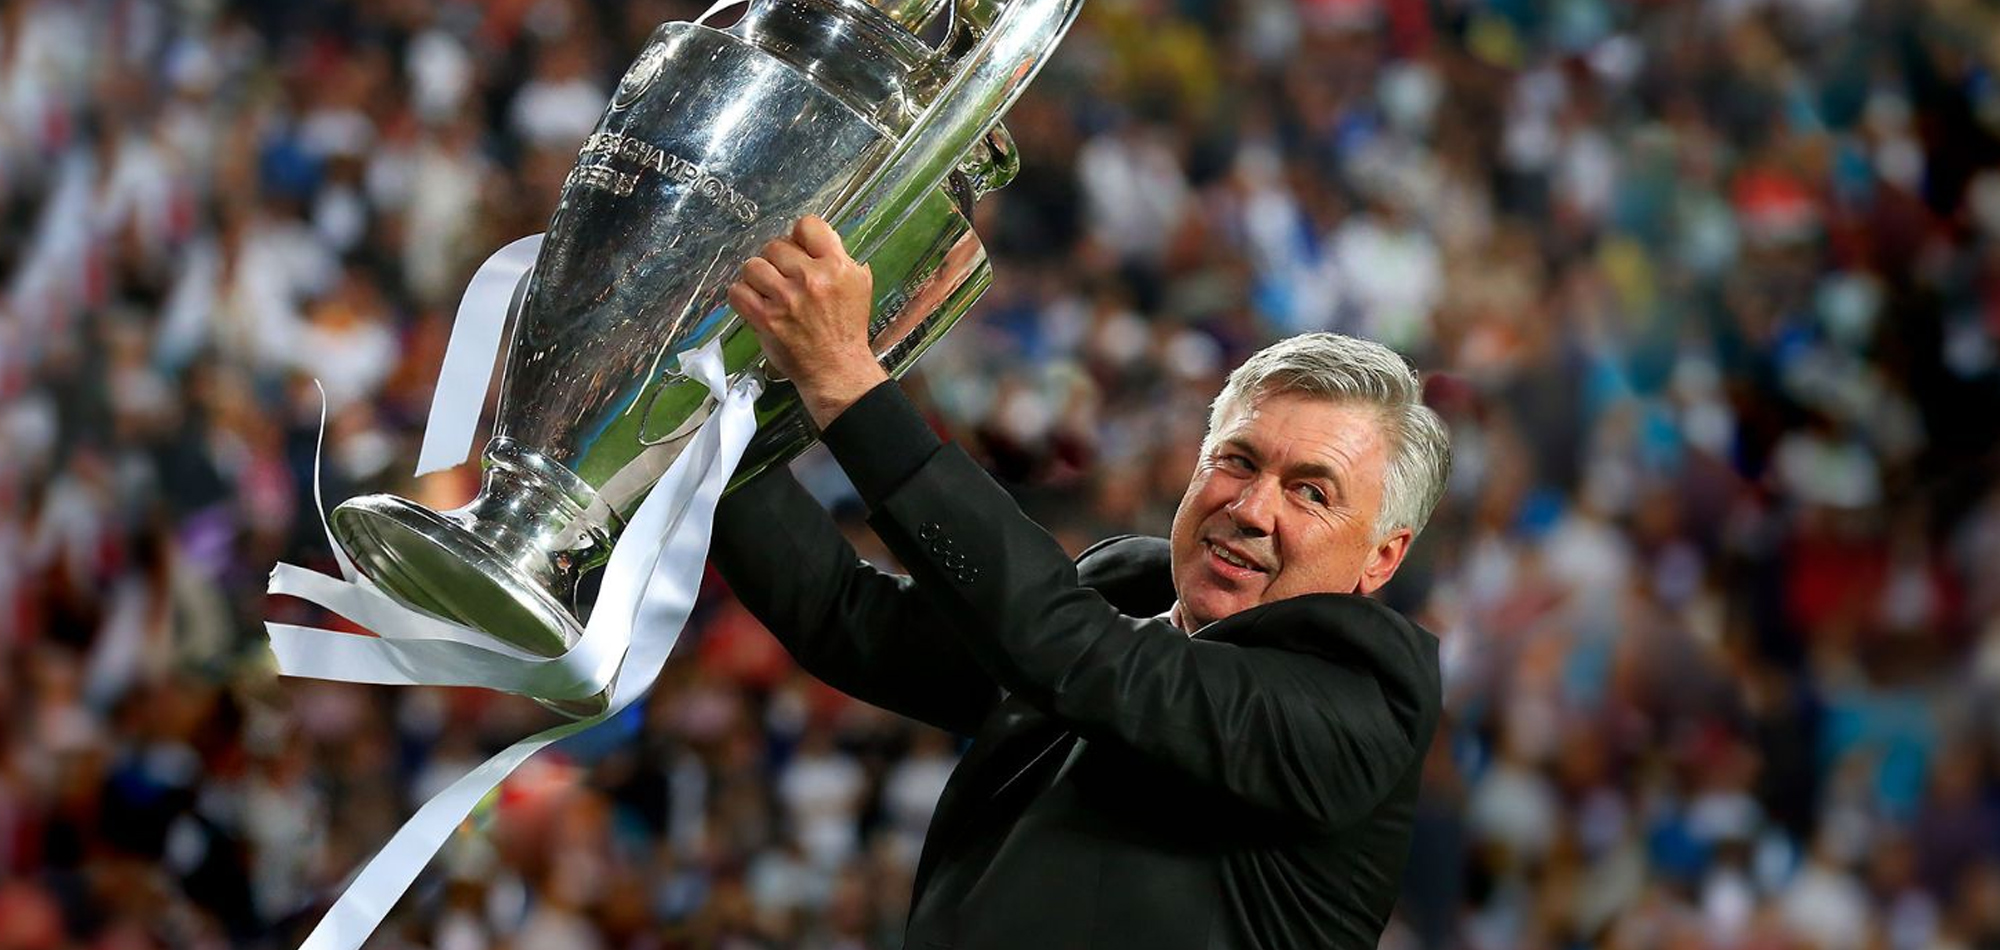 Official: Ancelotti signs three-year deal to return as Real Madrid coach